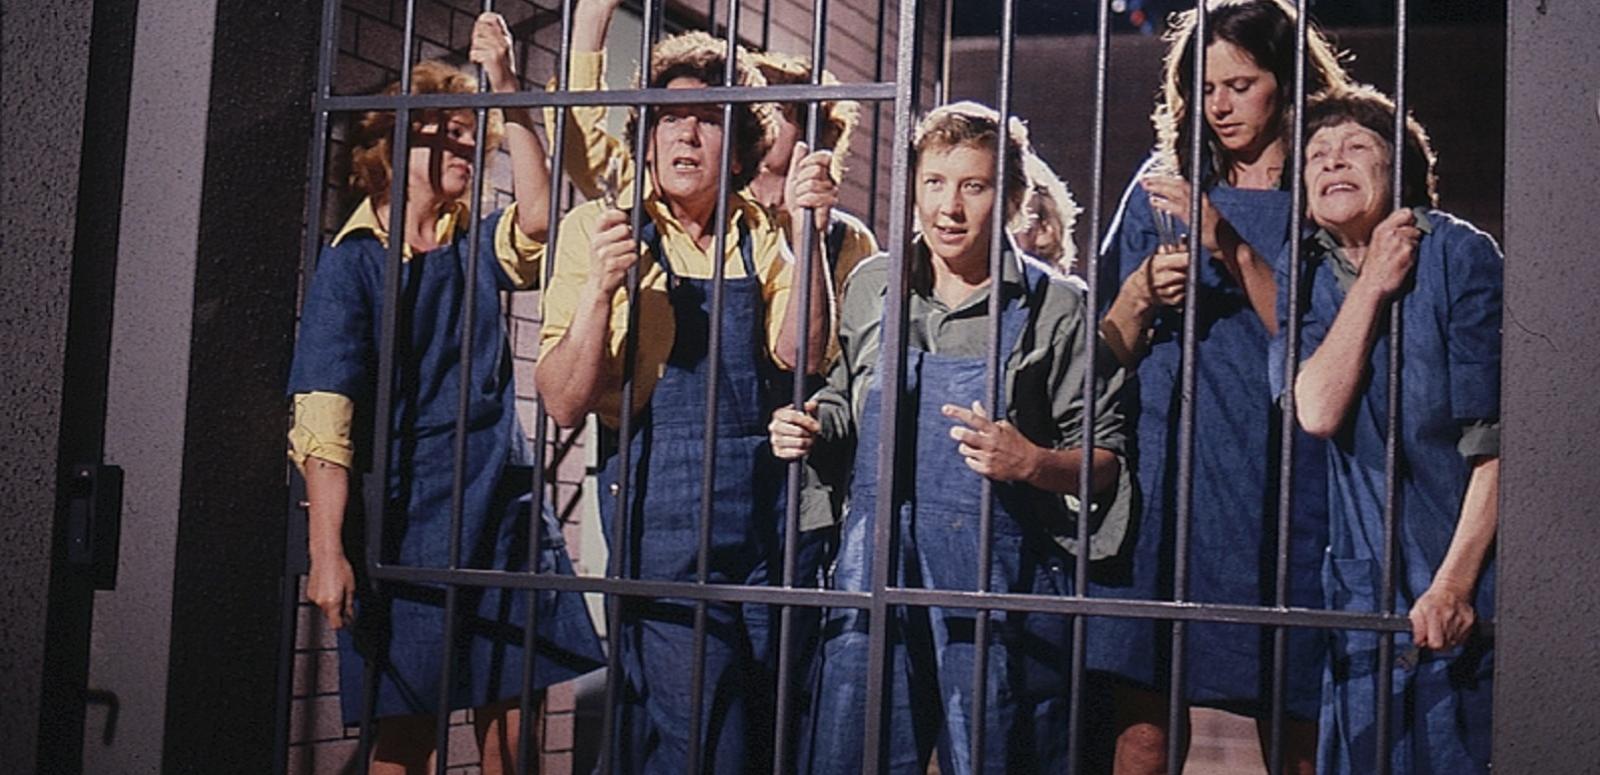 The immates of Wentworth Detention standing behind the bars during a riot. Frankie Doyle is the leader. Other main characters in this photo include Chrissy Latham and Lizzie Birdsworth.